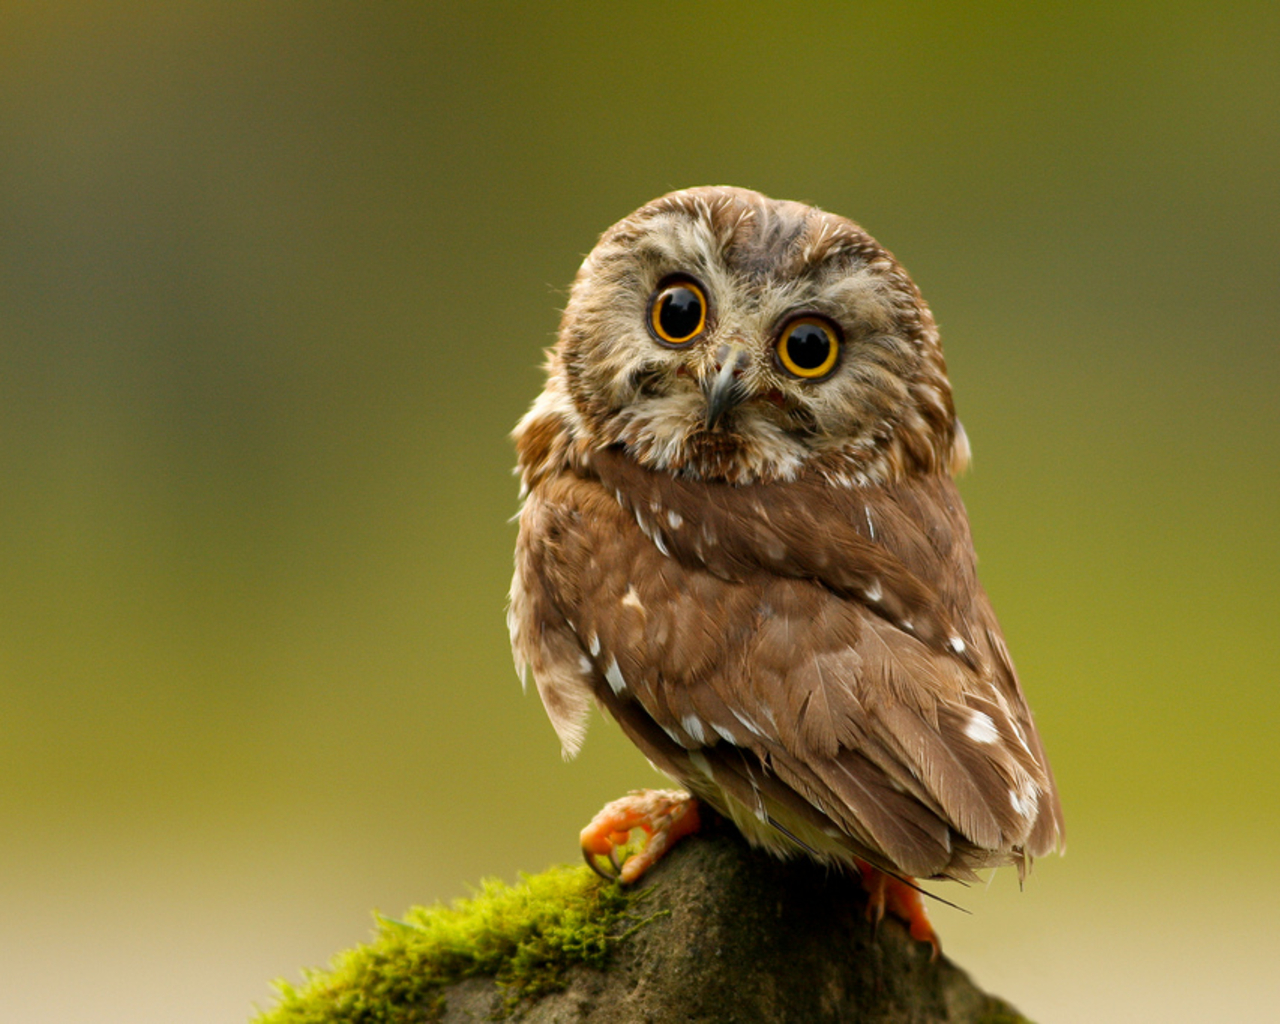 Cute Owl Wallpaper - Northern Saw Whet Owl Gif , HD Wallpaper & Backgrounds